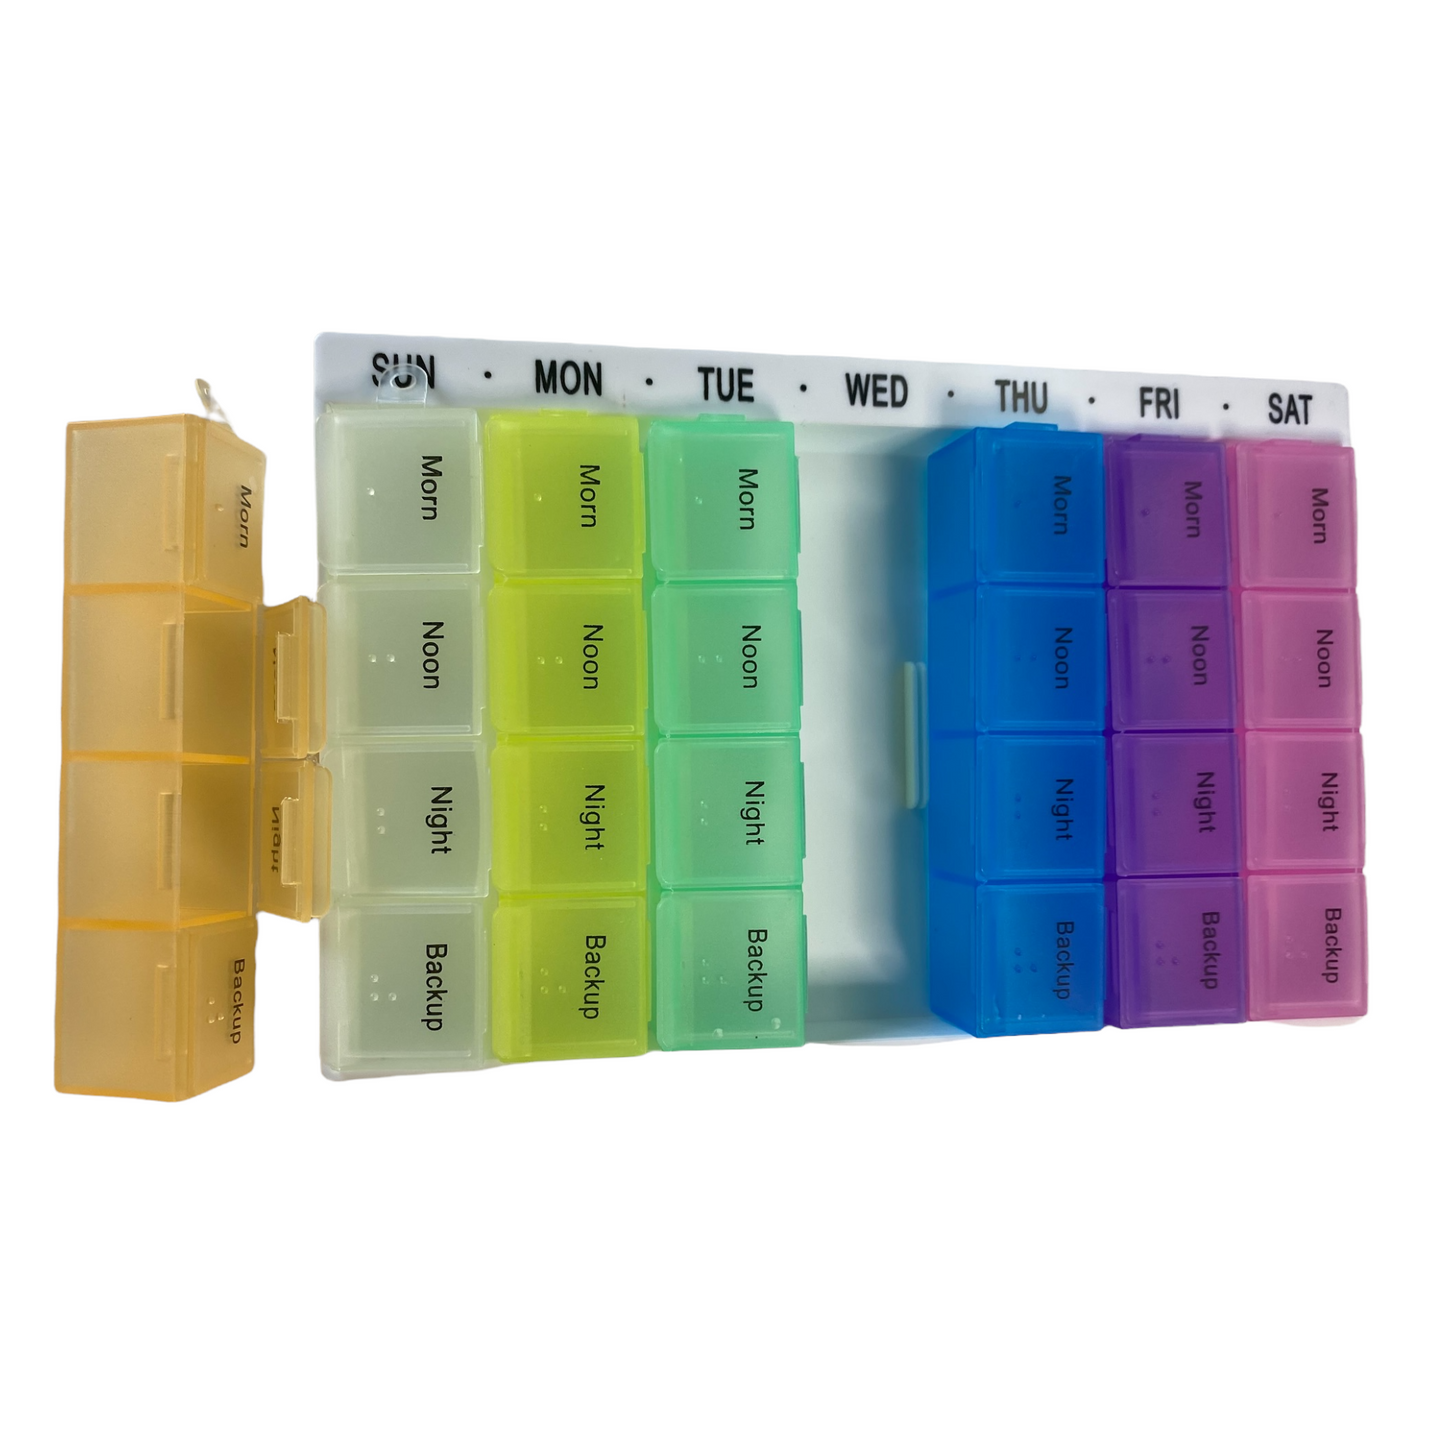 7 Day Pill Box — 4 Doses Daily White case Managing Medications SPIRIT SPARKPLUGS White case  